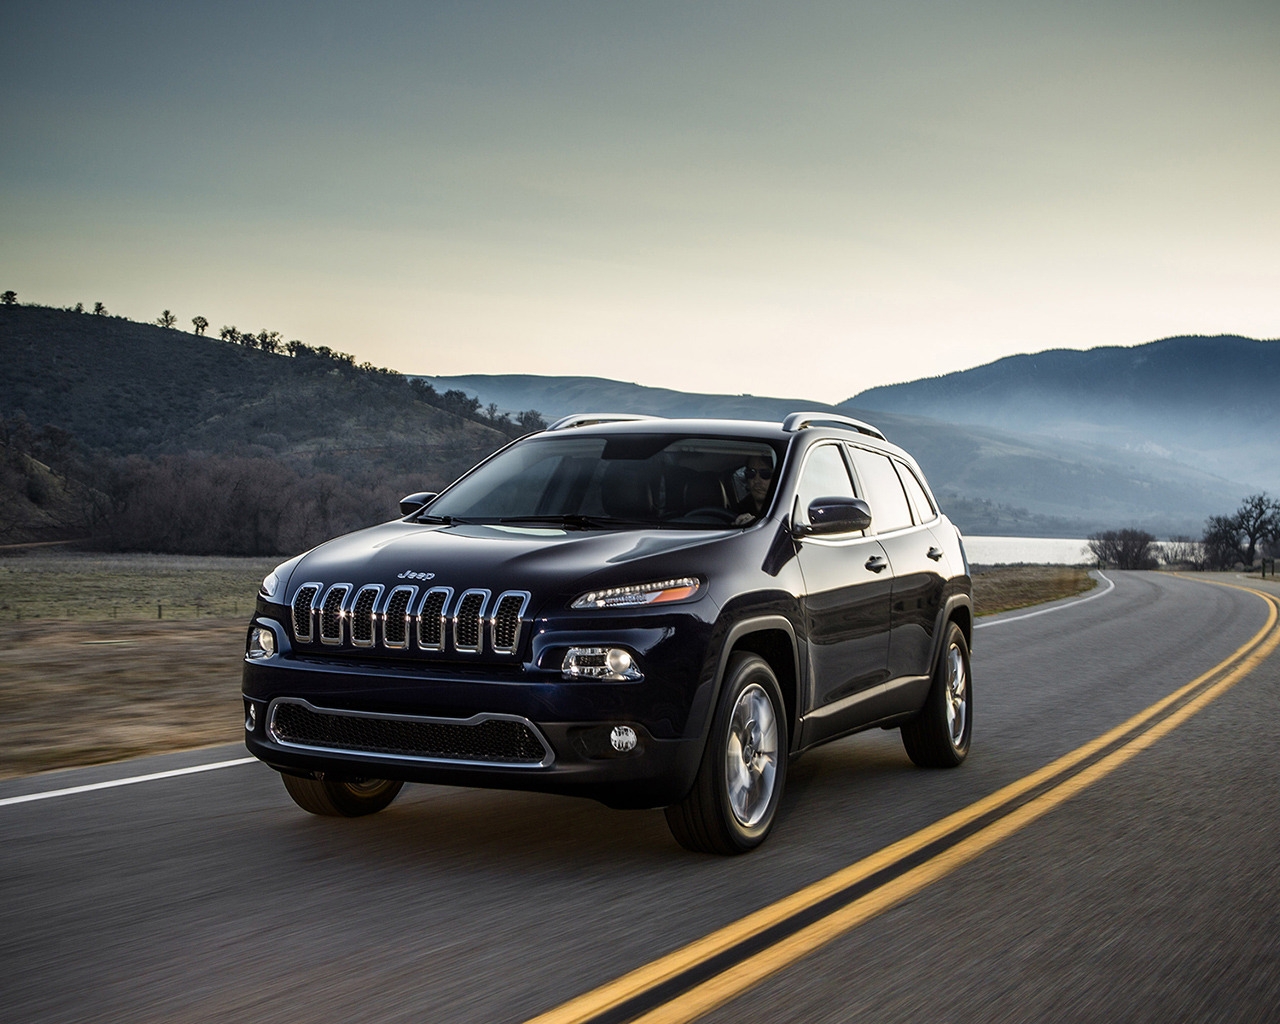 Jeep Cherokee 2014 Edition for 1280 x 1024 resolution